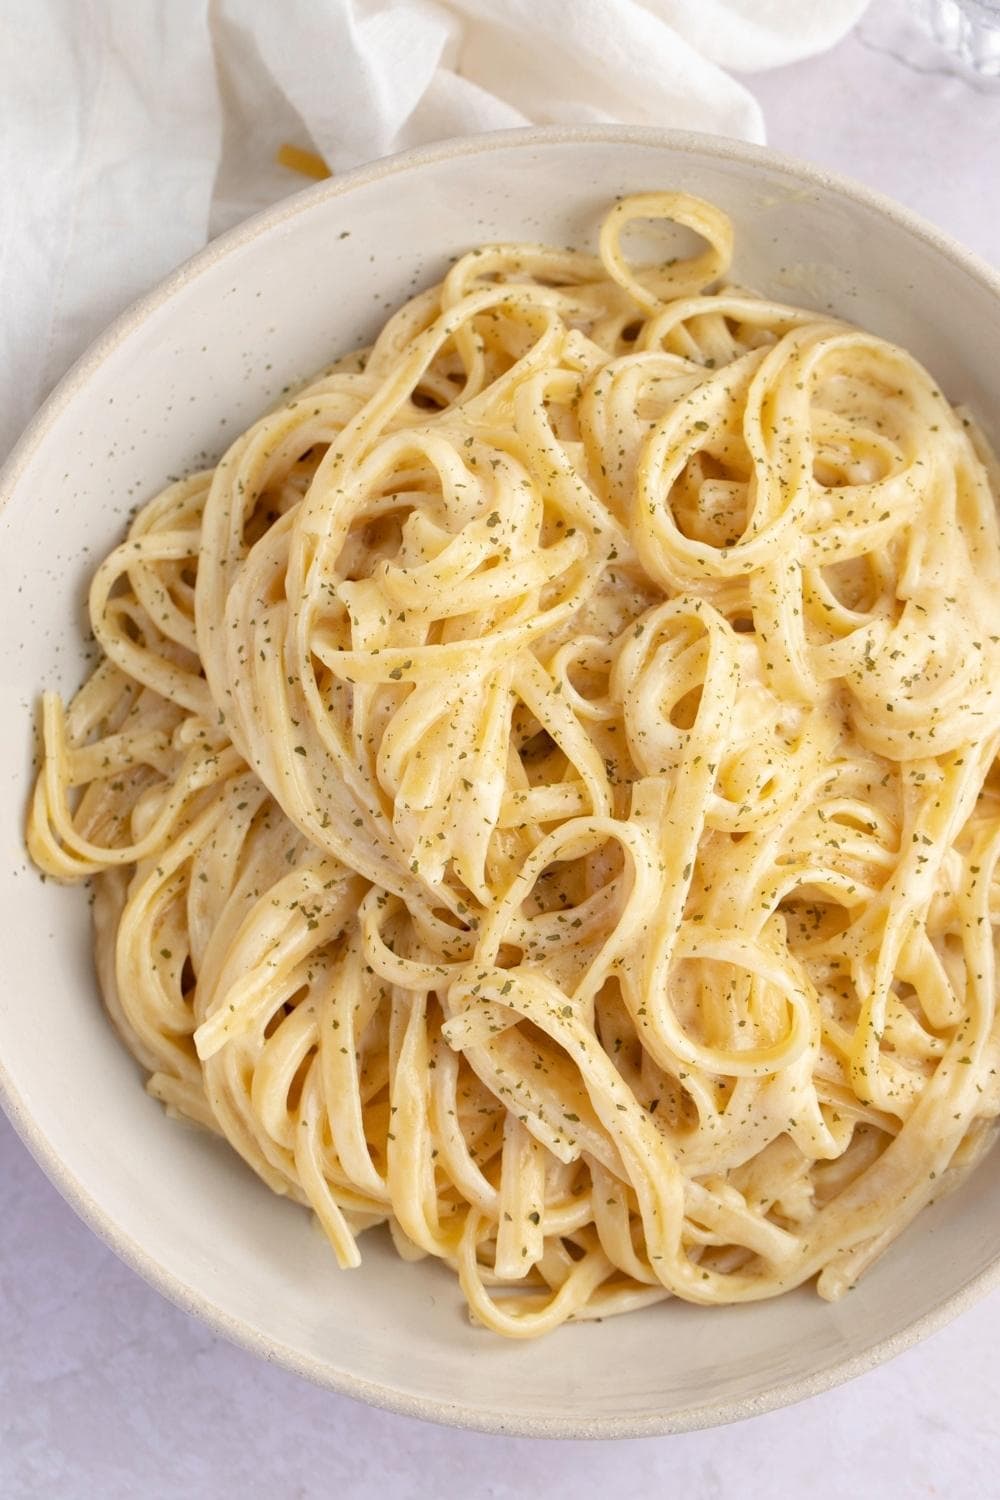 Creamy Fettucine Recipe in a Bowl with Butter, Cream and Cheese